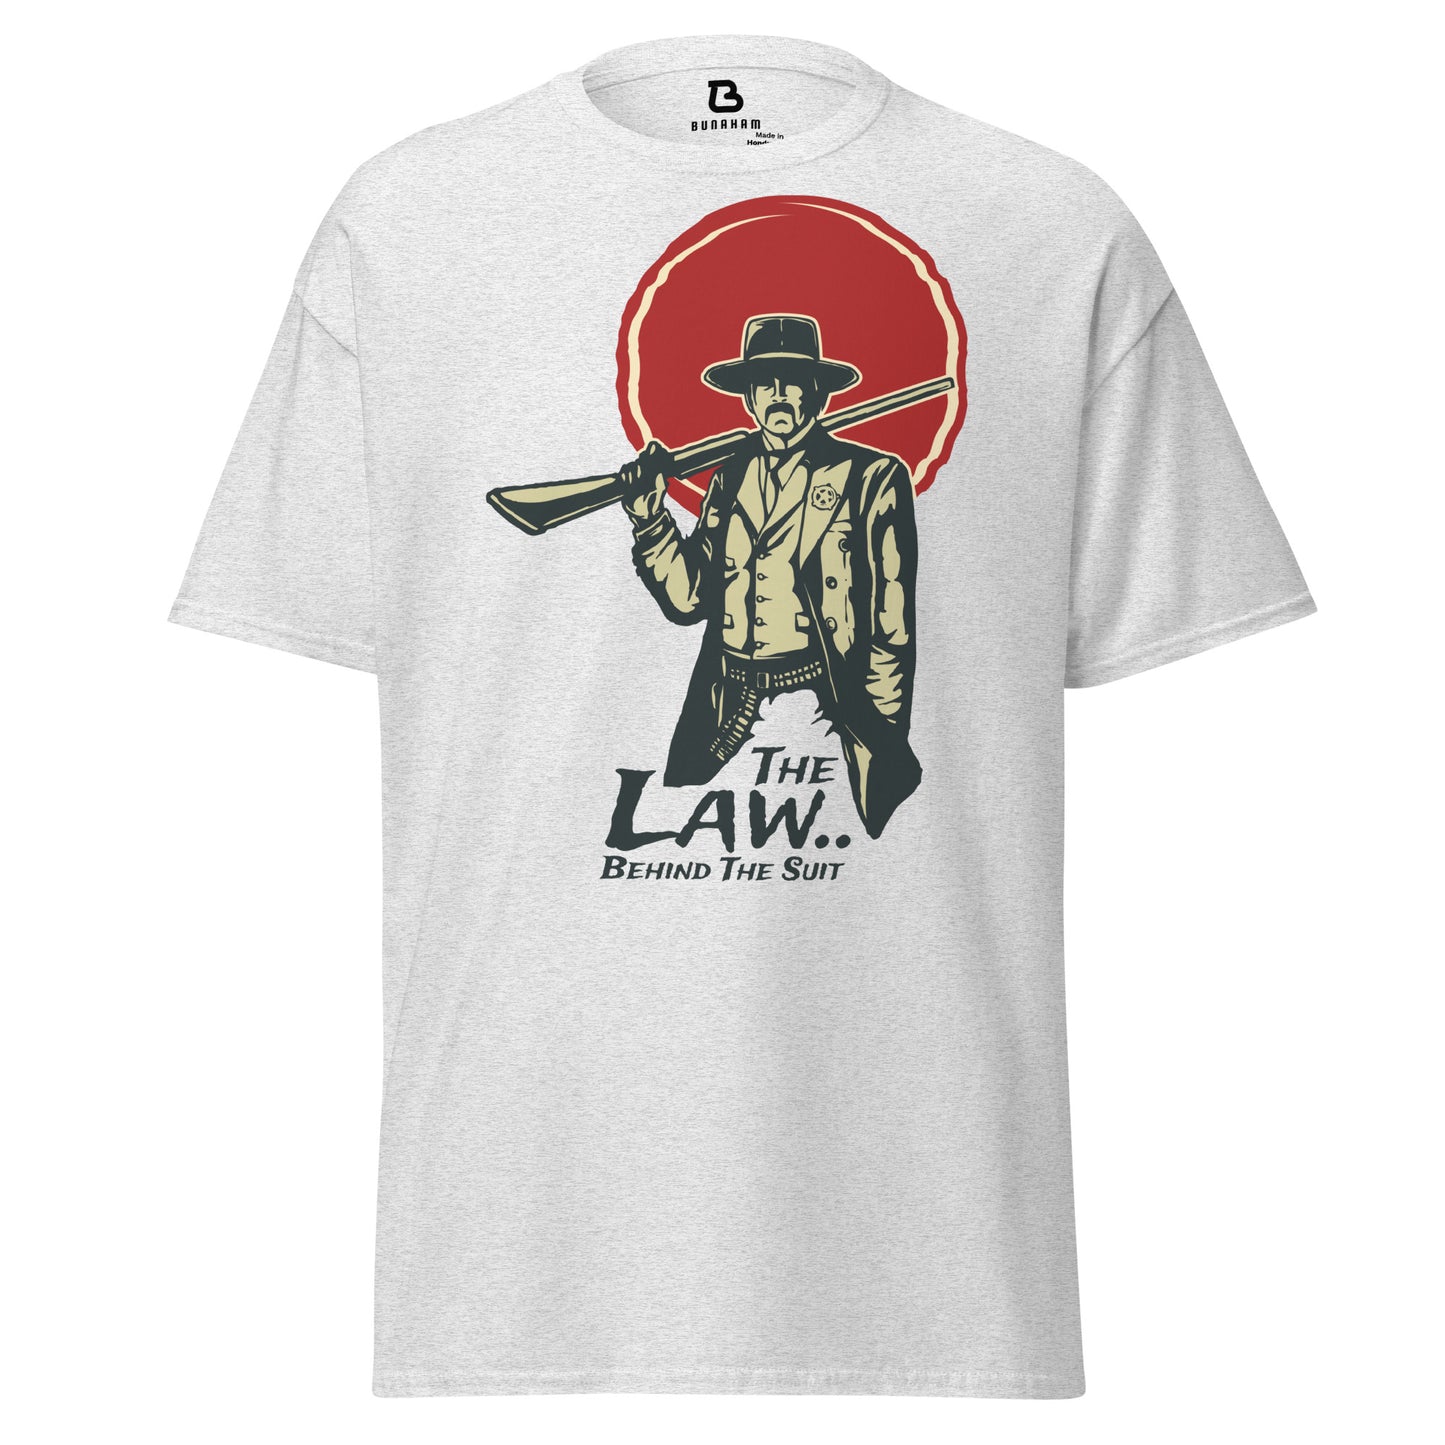 Men's Classic Tee - The Law Behind The Suit